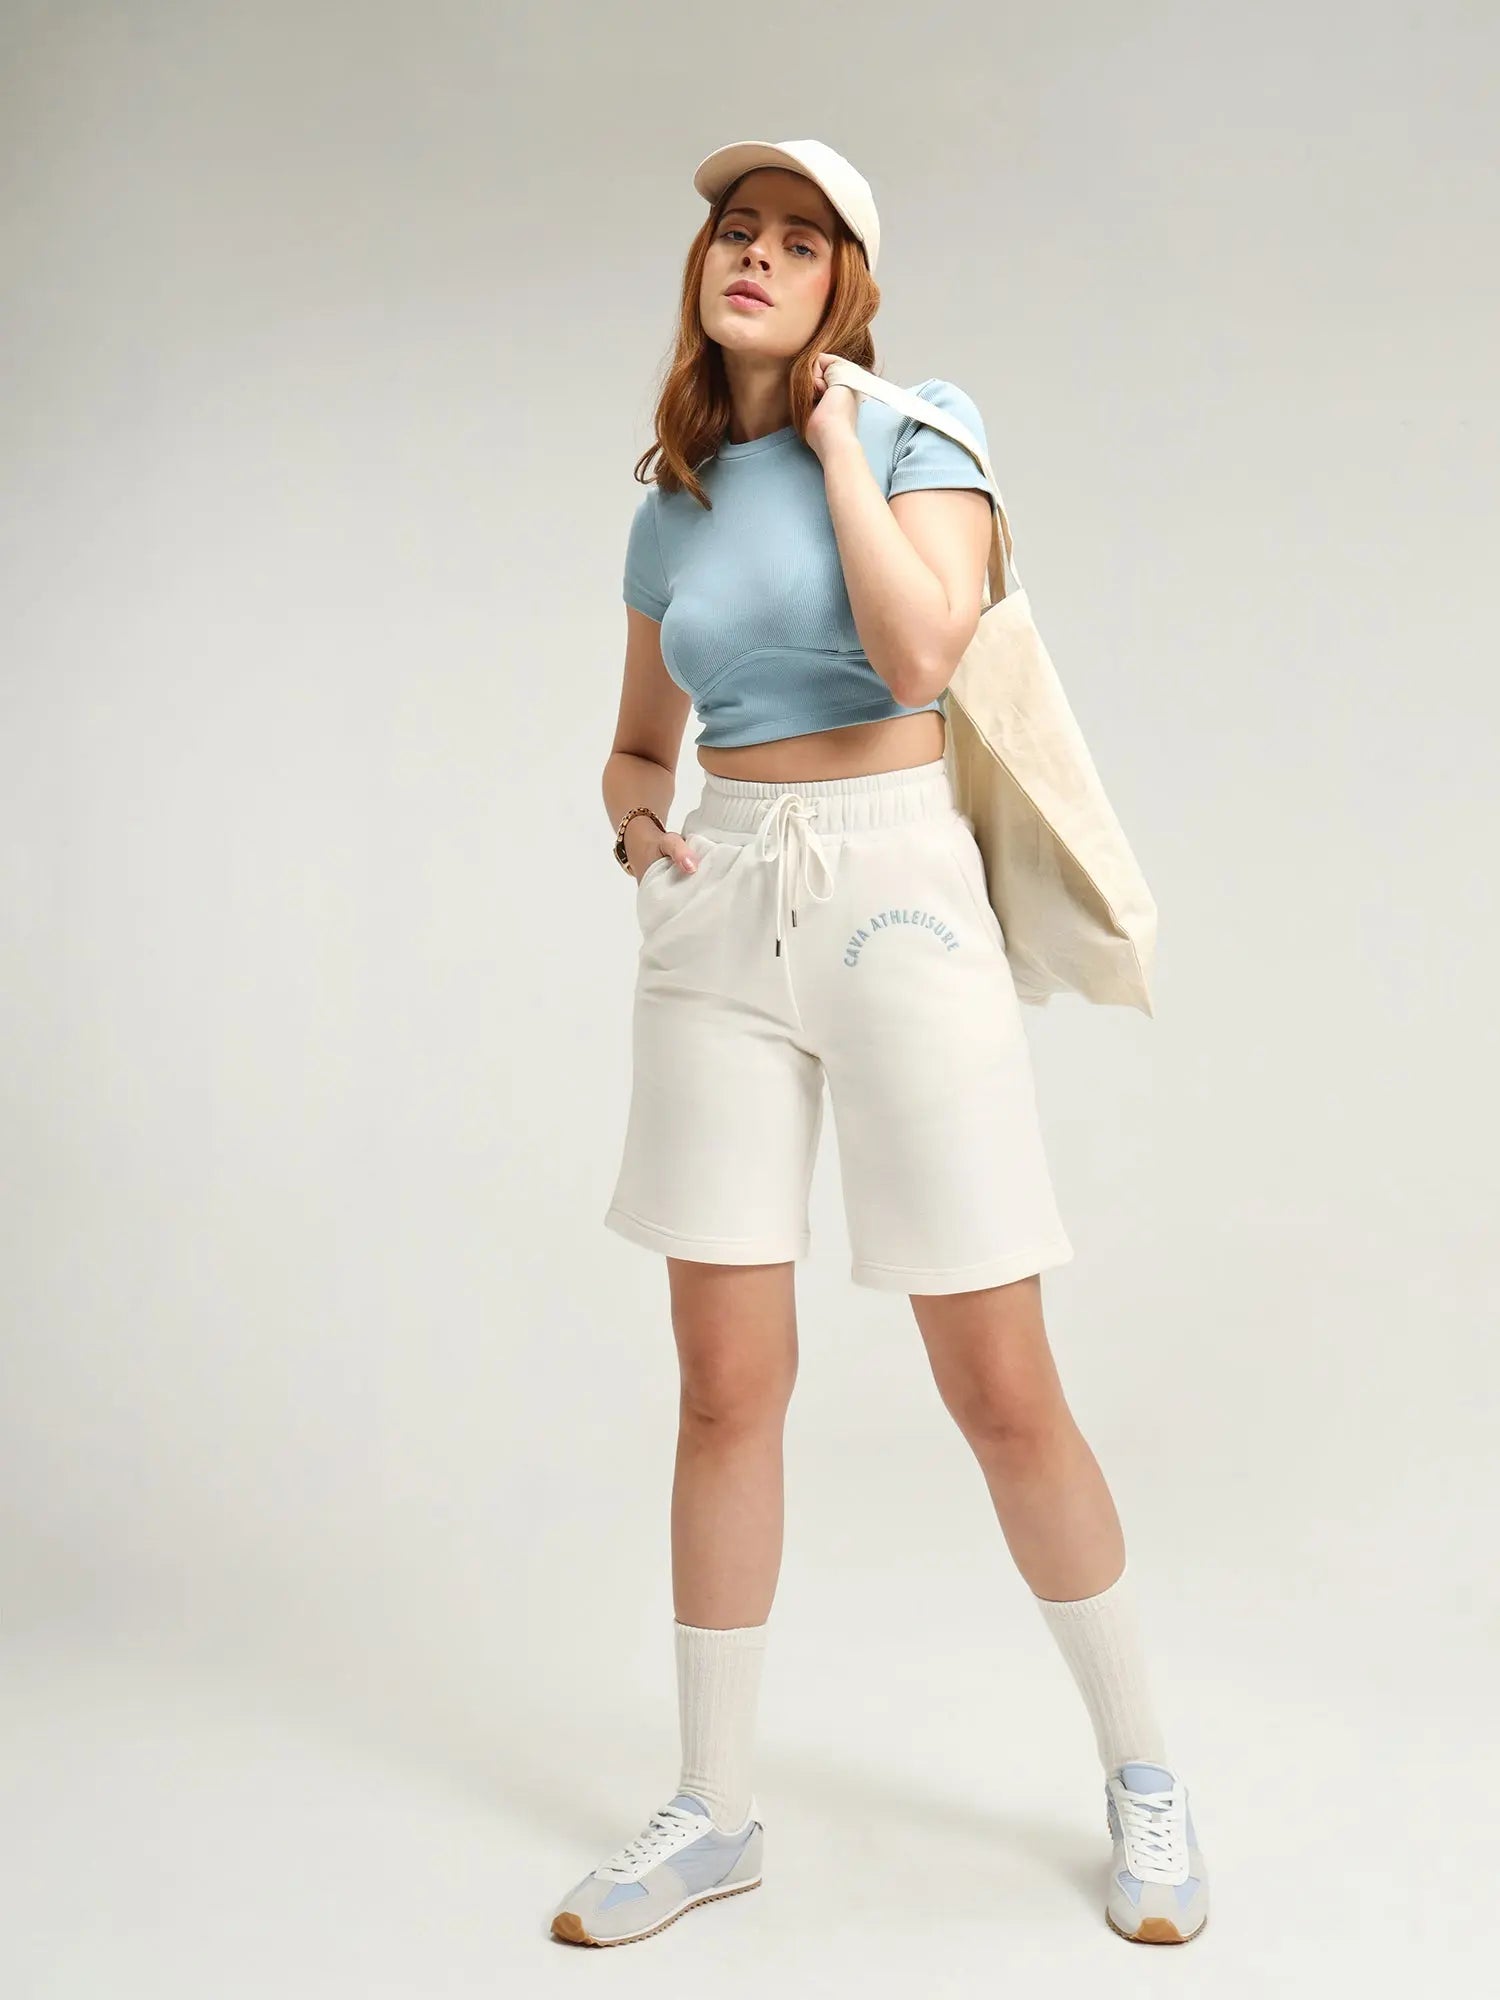 Athens Blue Top and White Shorts Set CAVA athleisure